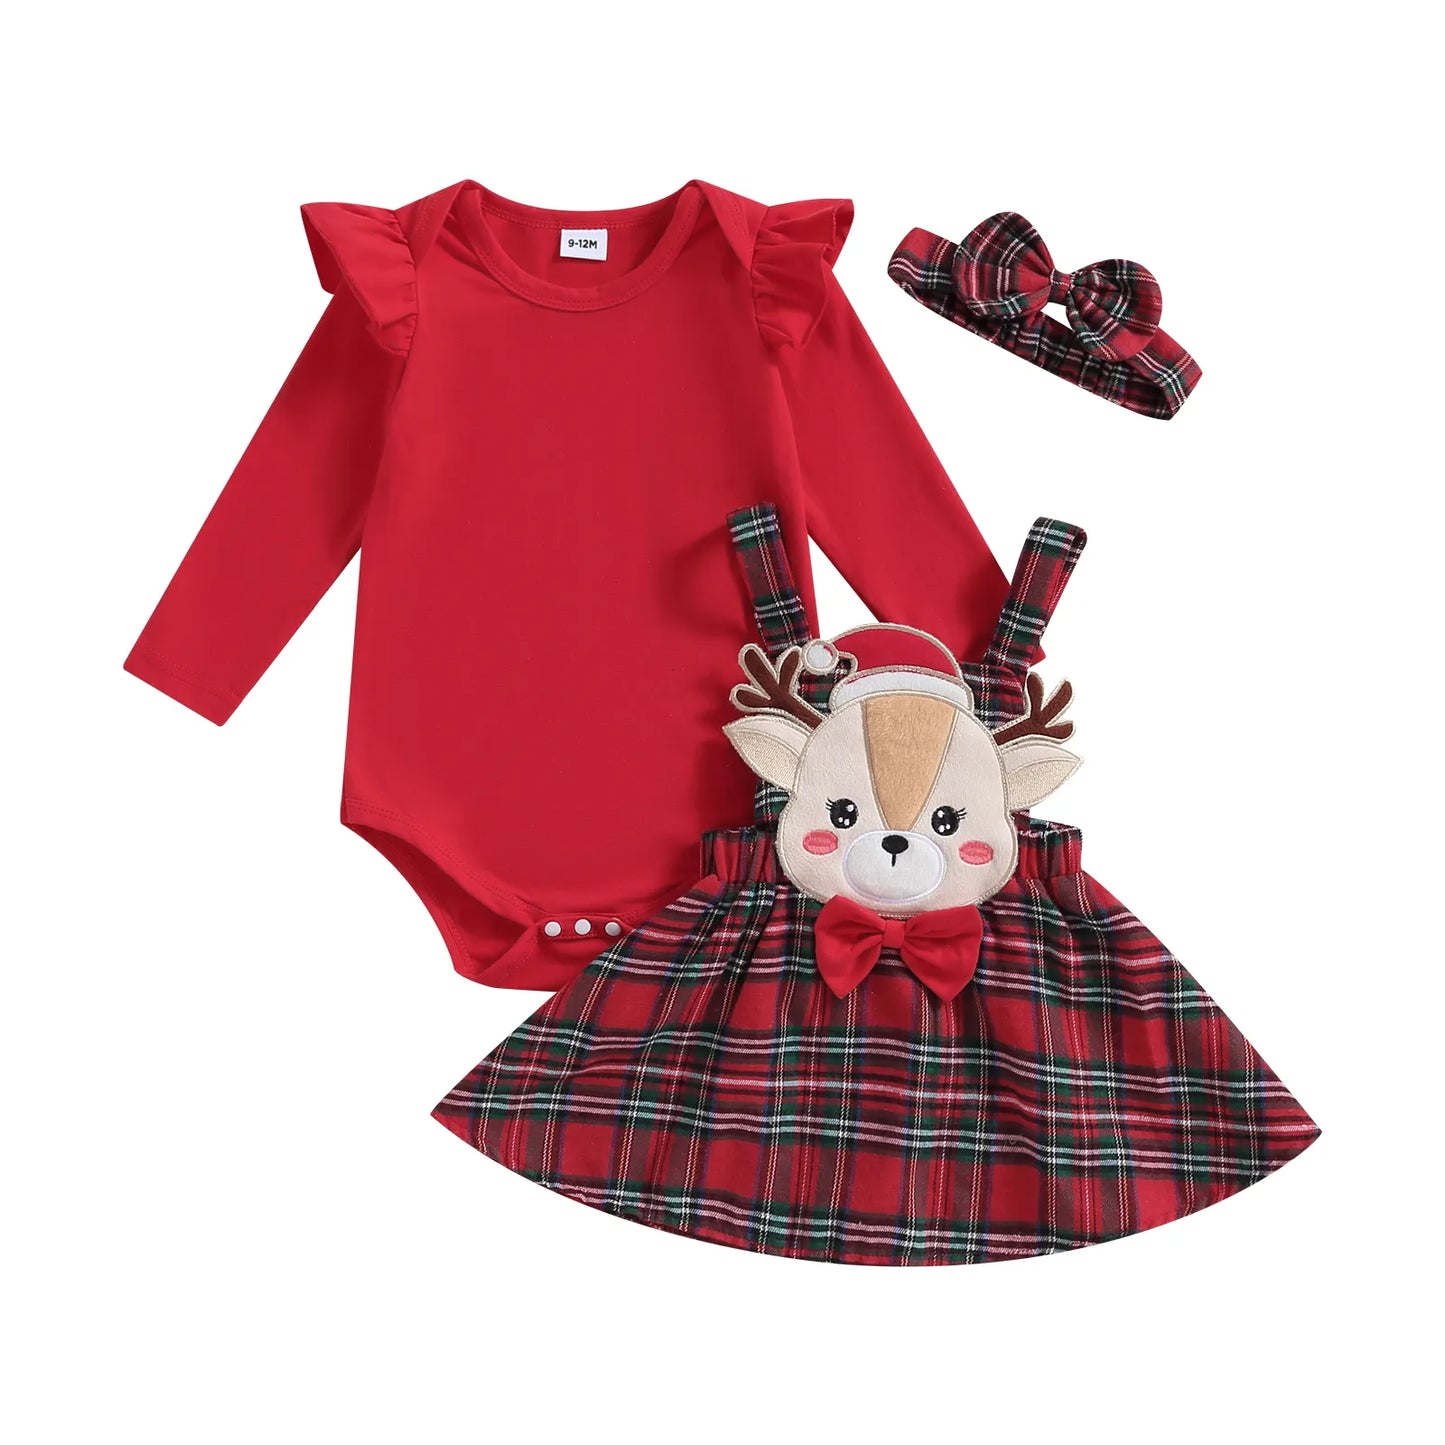 baby 0-18M Christmas Romper Set, Knit Red Romper Deer Plaid Dress With Headband Xmas Outfit